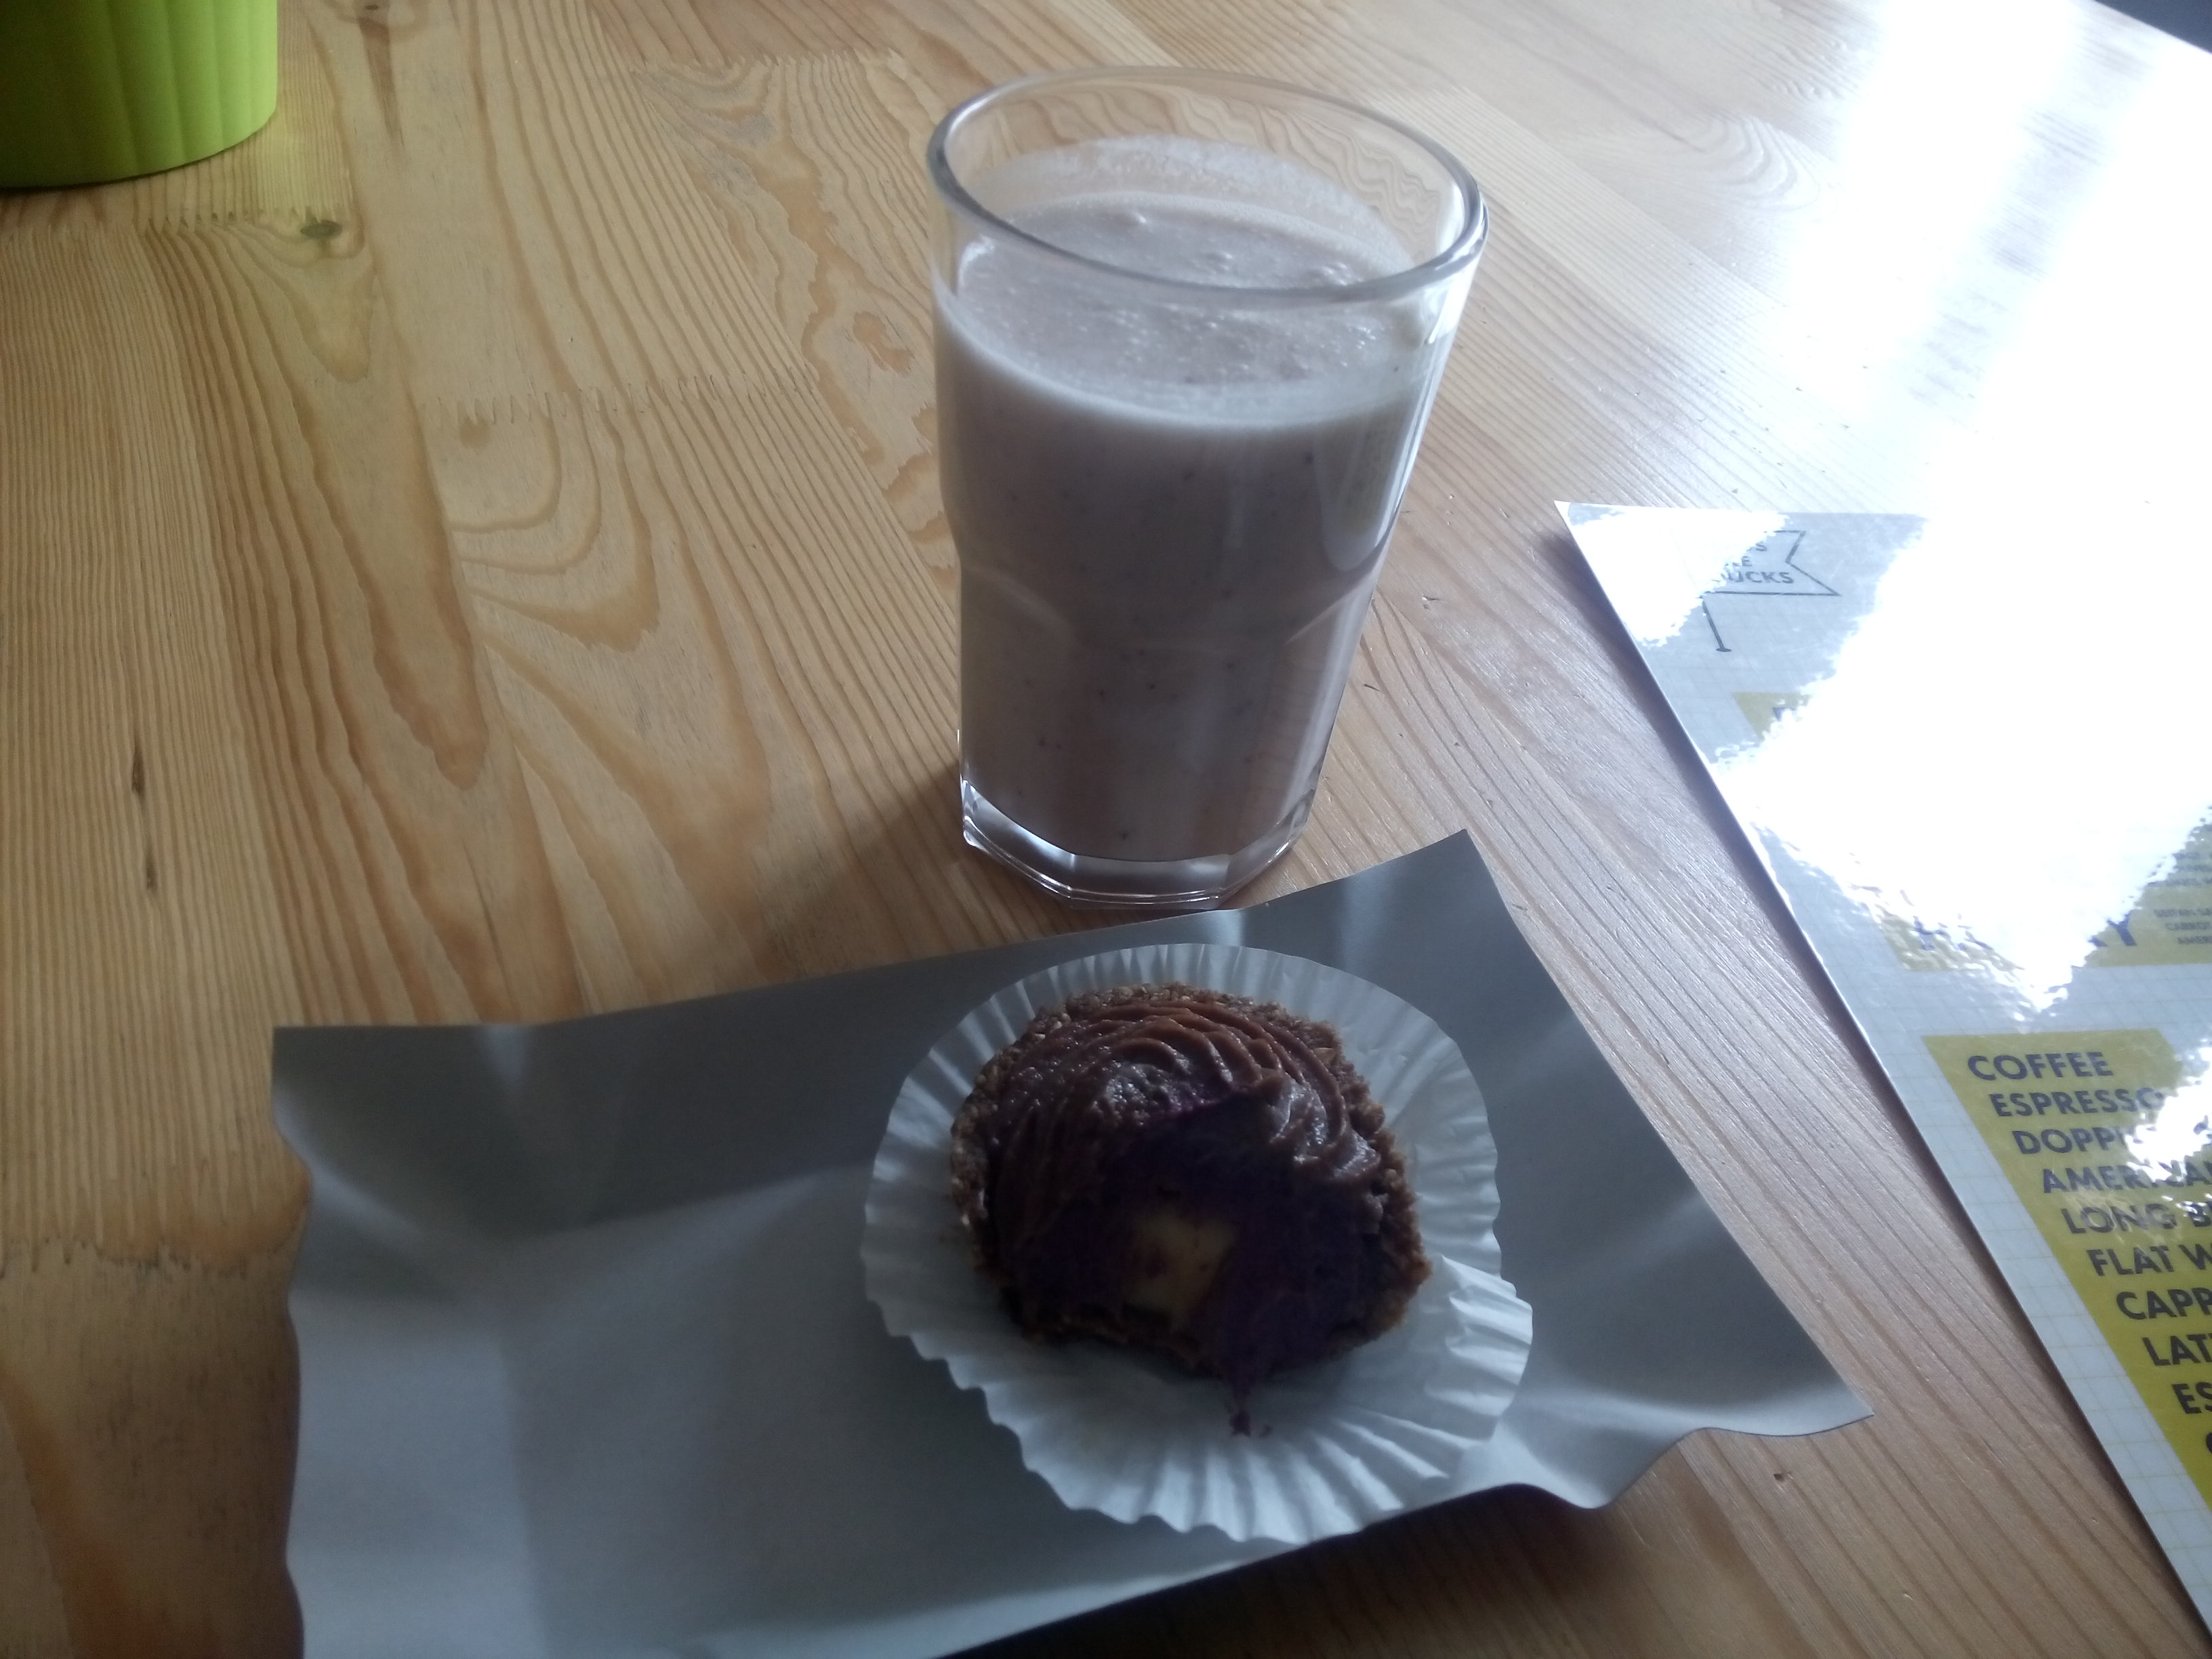 A wooden table with a glass of milkshake and a small chocolatey cake on cardboard tray